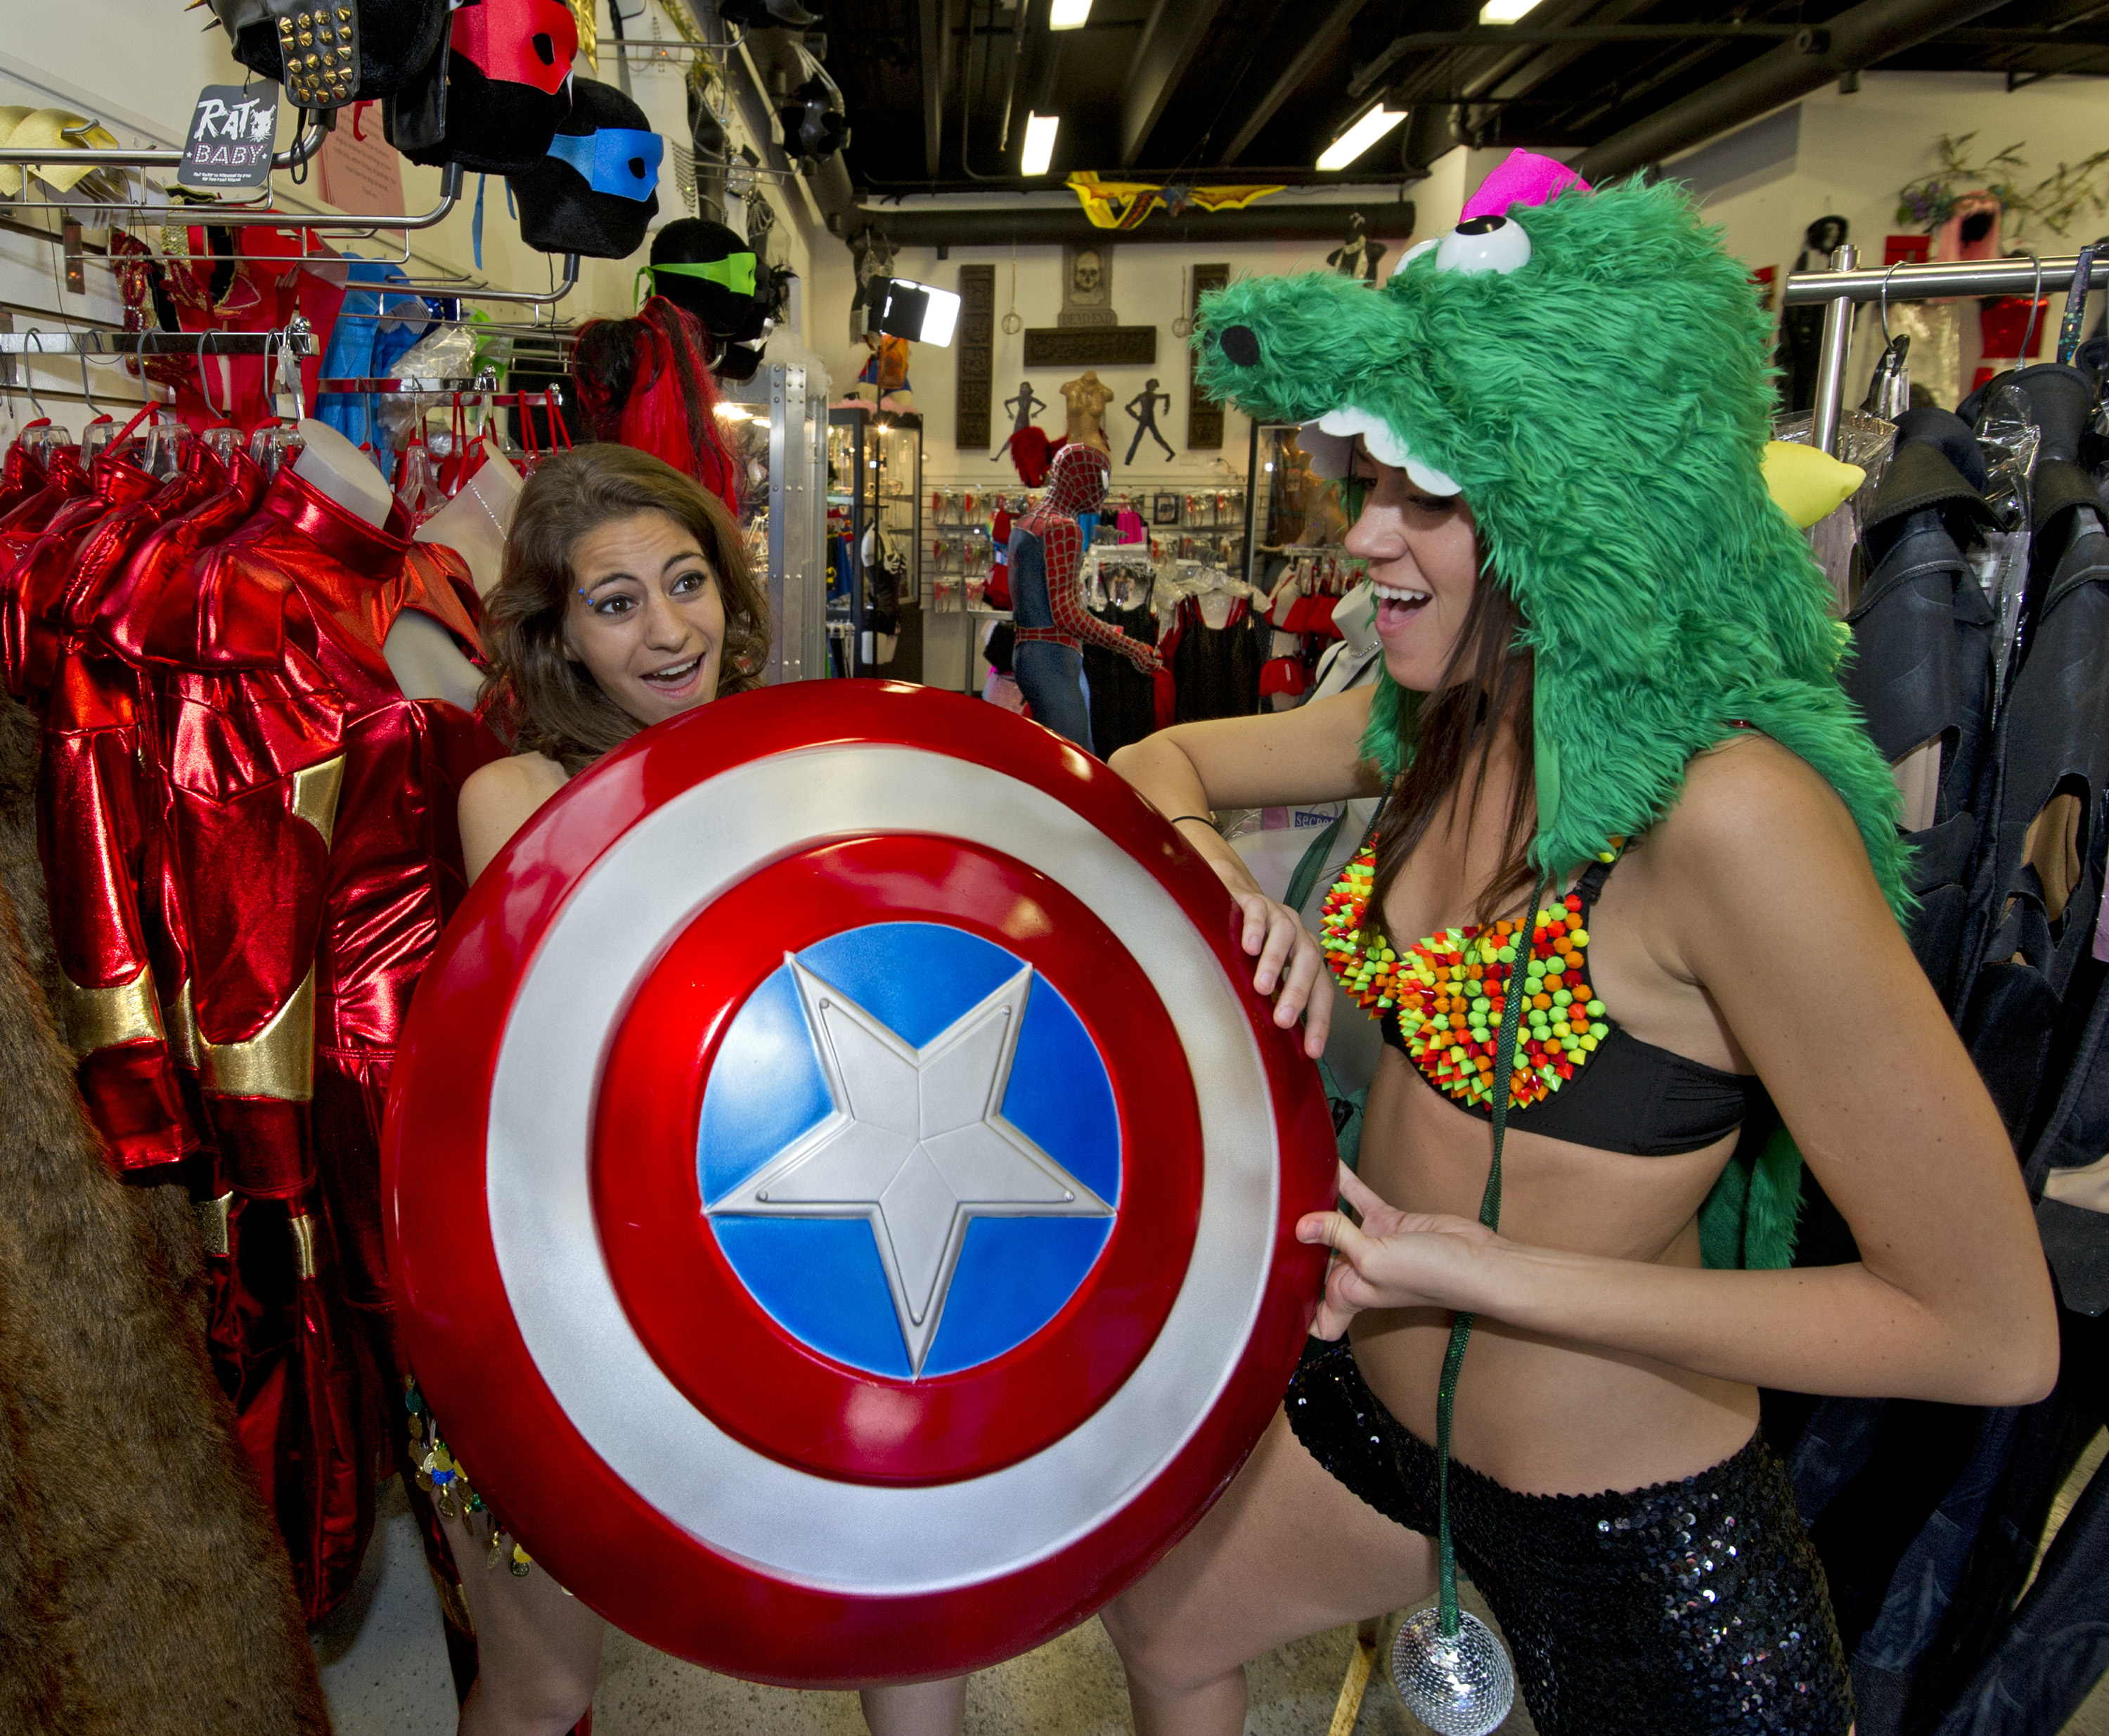 How to Dress (or Undress) For Fantasy Fest in Key West